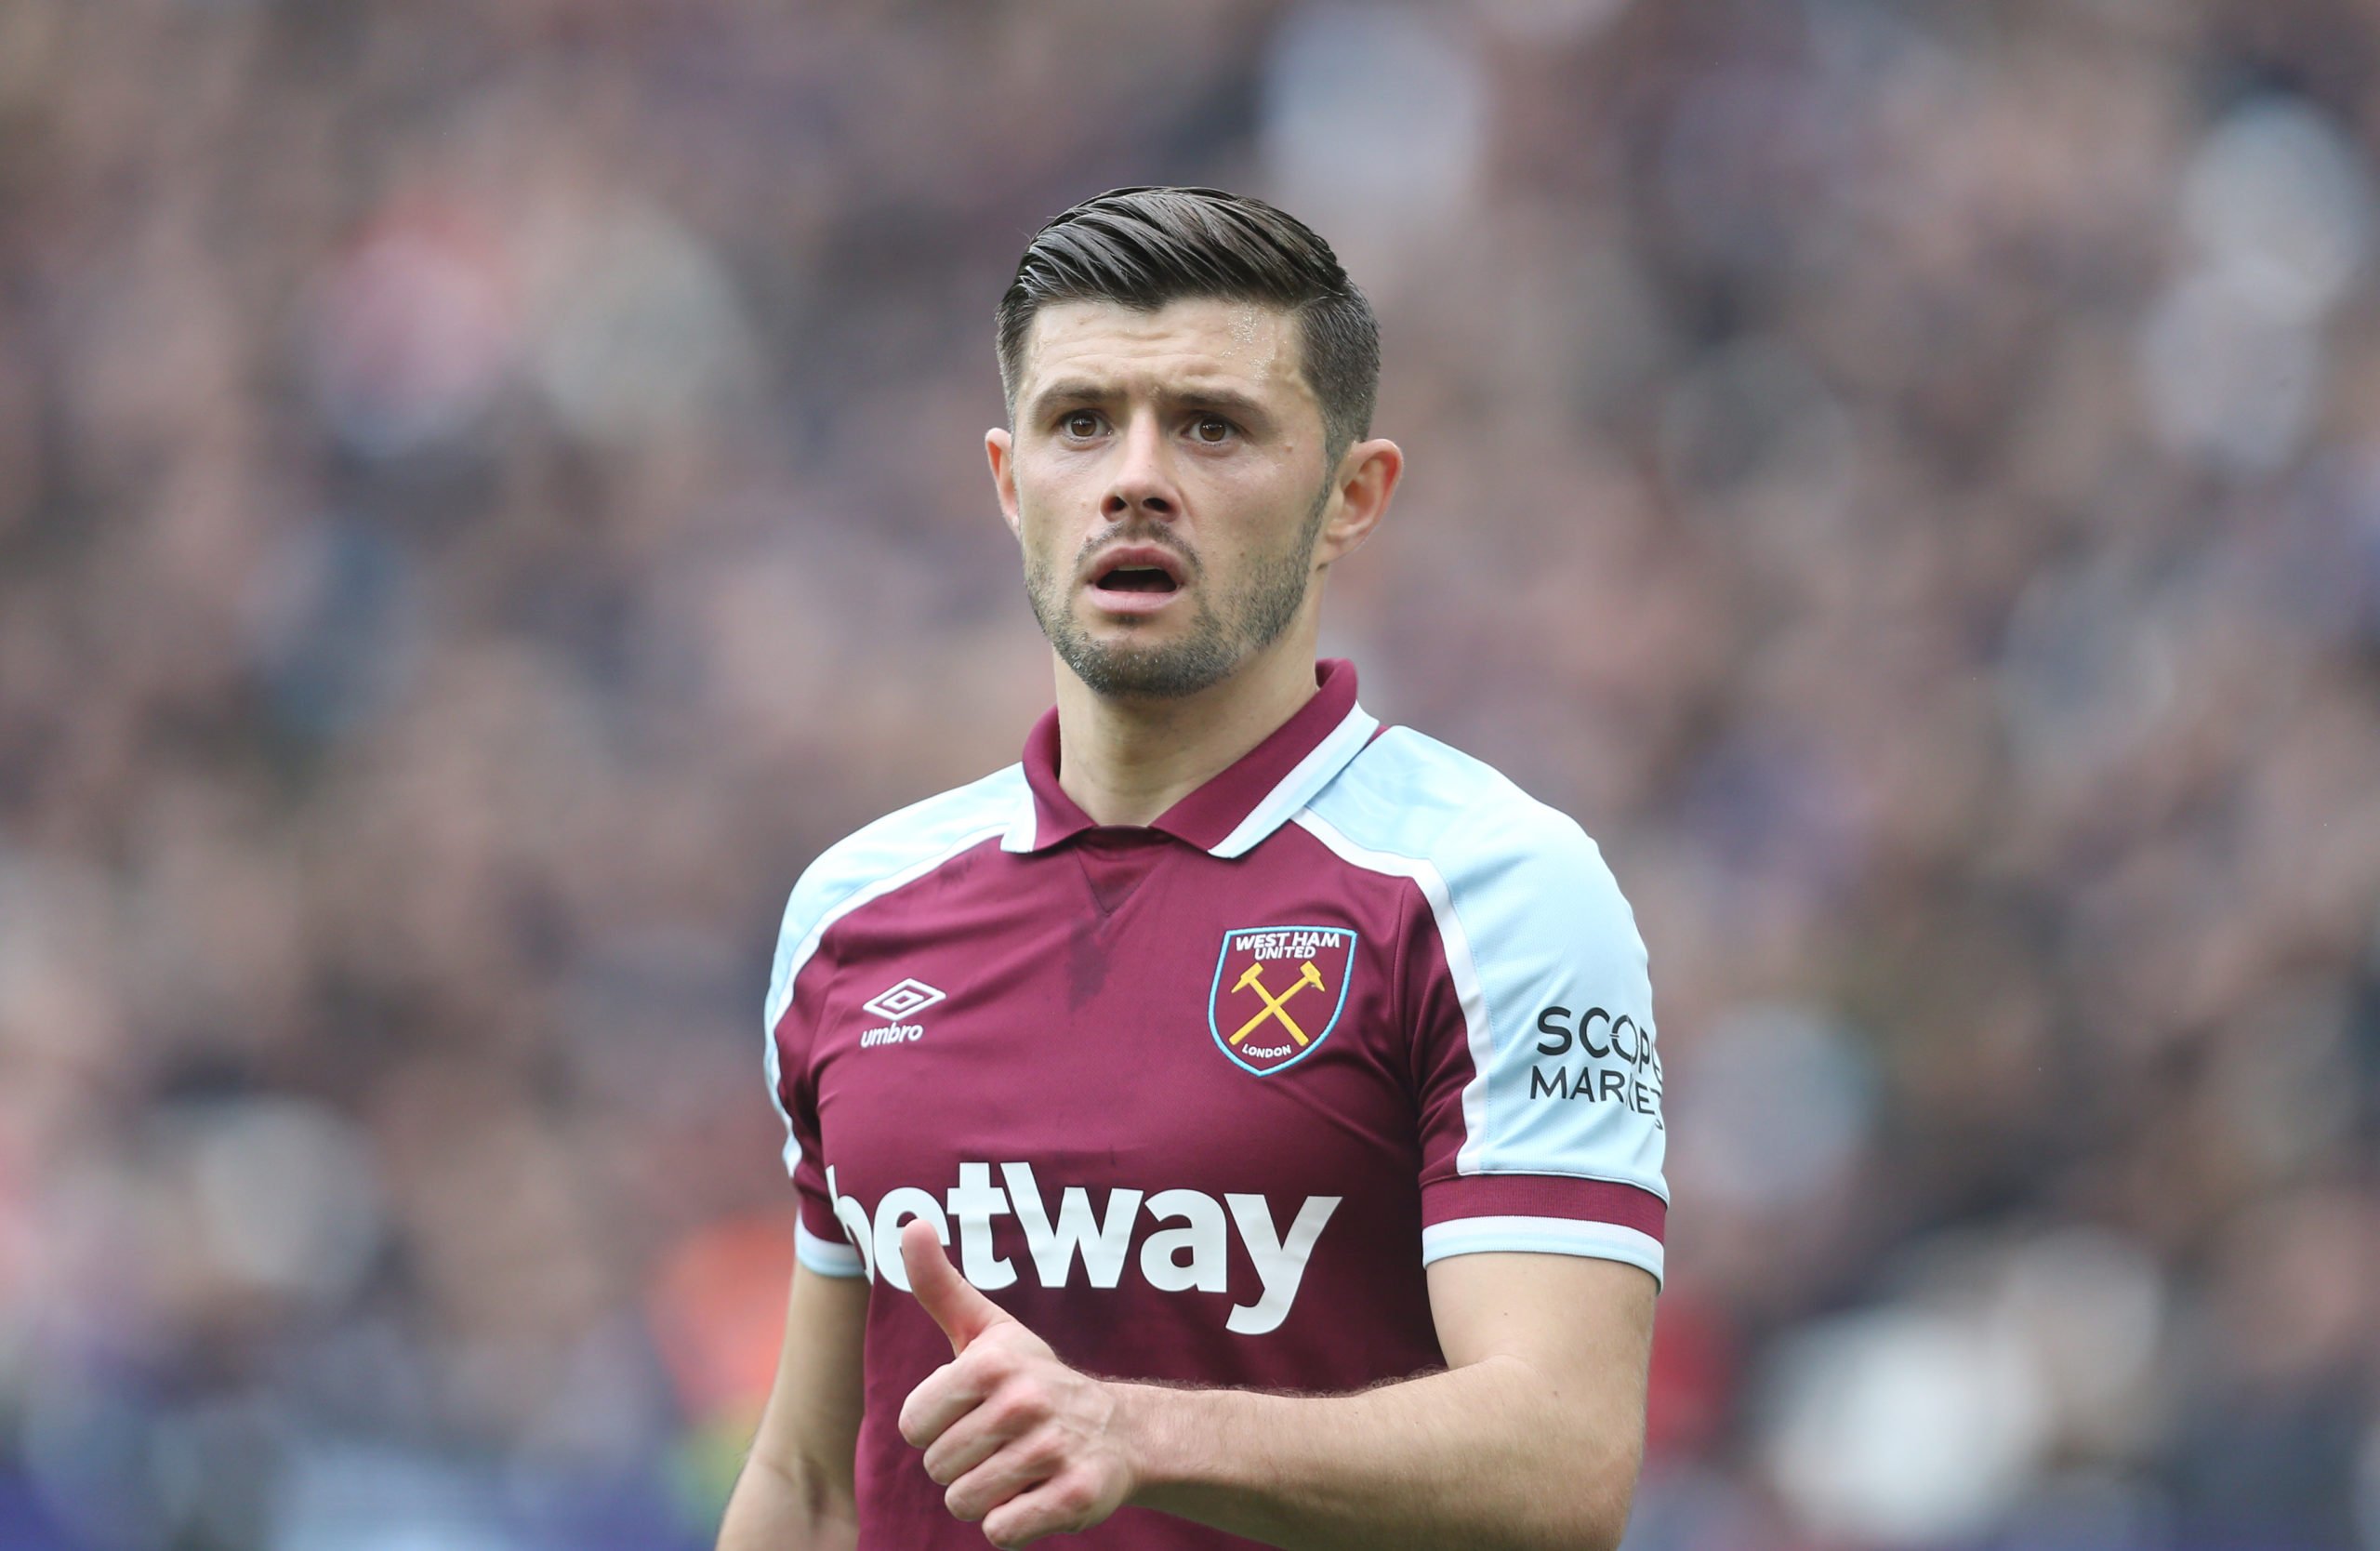 Aaron Cresswell says West Ham star has changed his mind over former teammate Dimitri Payet